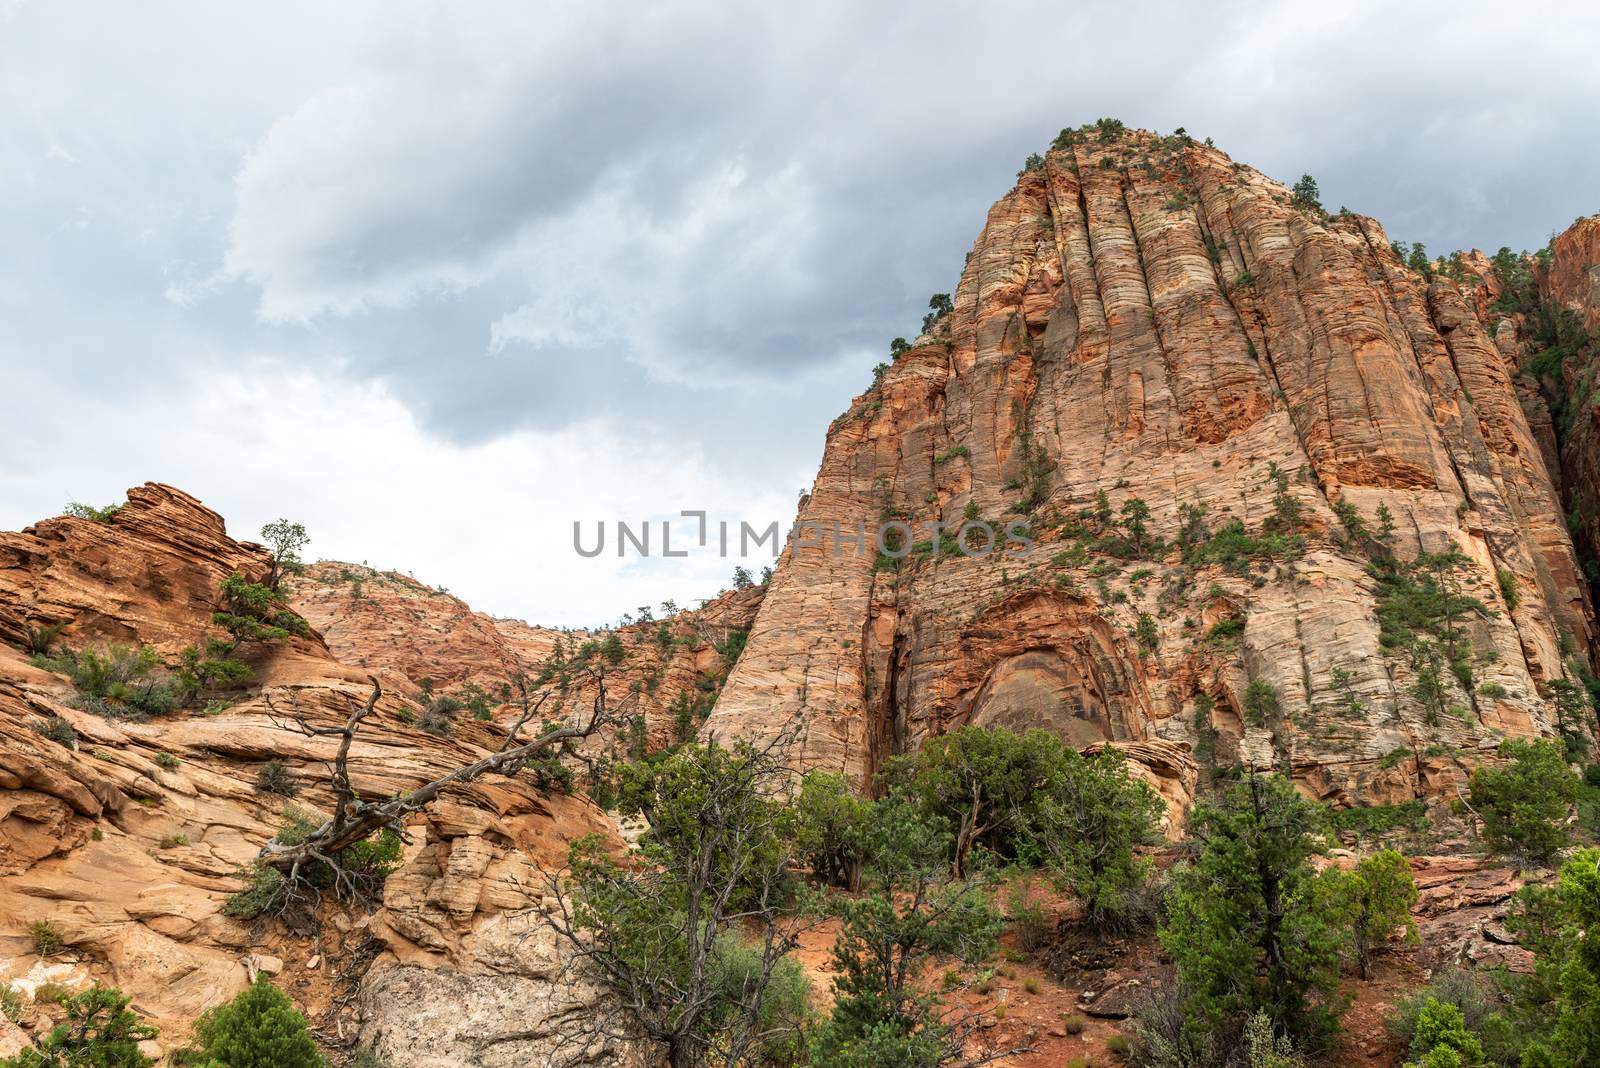 View from the Canyon Overlook Trail in Zion National Park, Utah by Njean